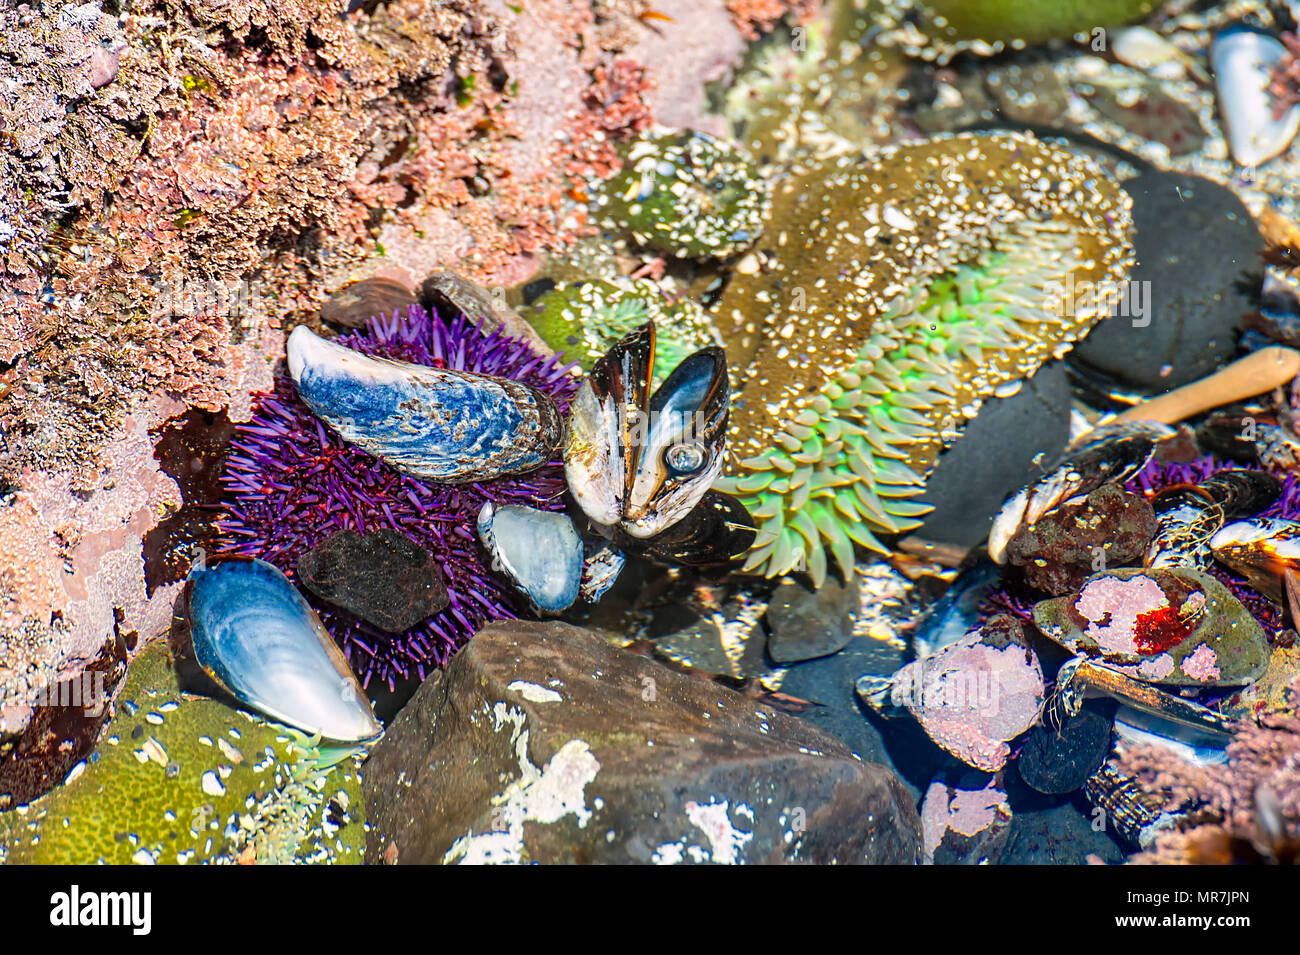 Closeup of tide pool at Yaquina Head Cobble Beach.  Sea anemones,purple sea urchin,California Mussel, and rocks lay in shallow waters. Stock Photo